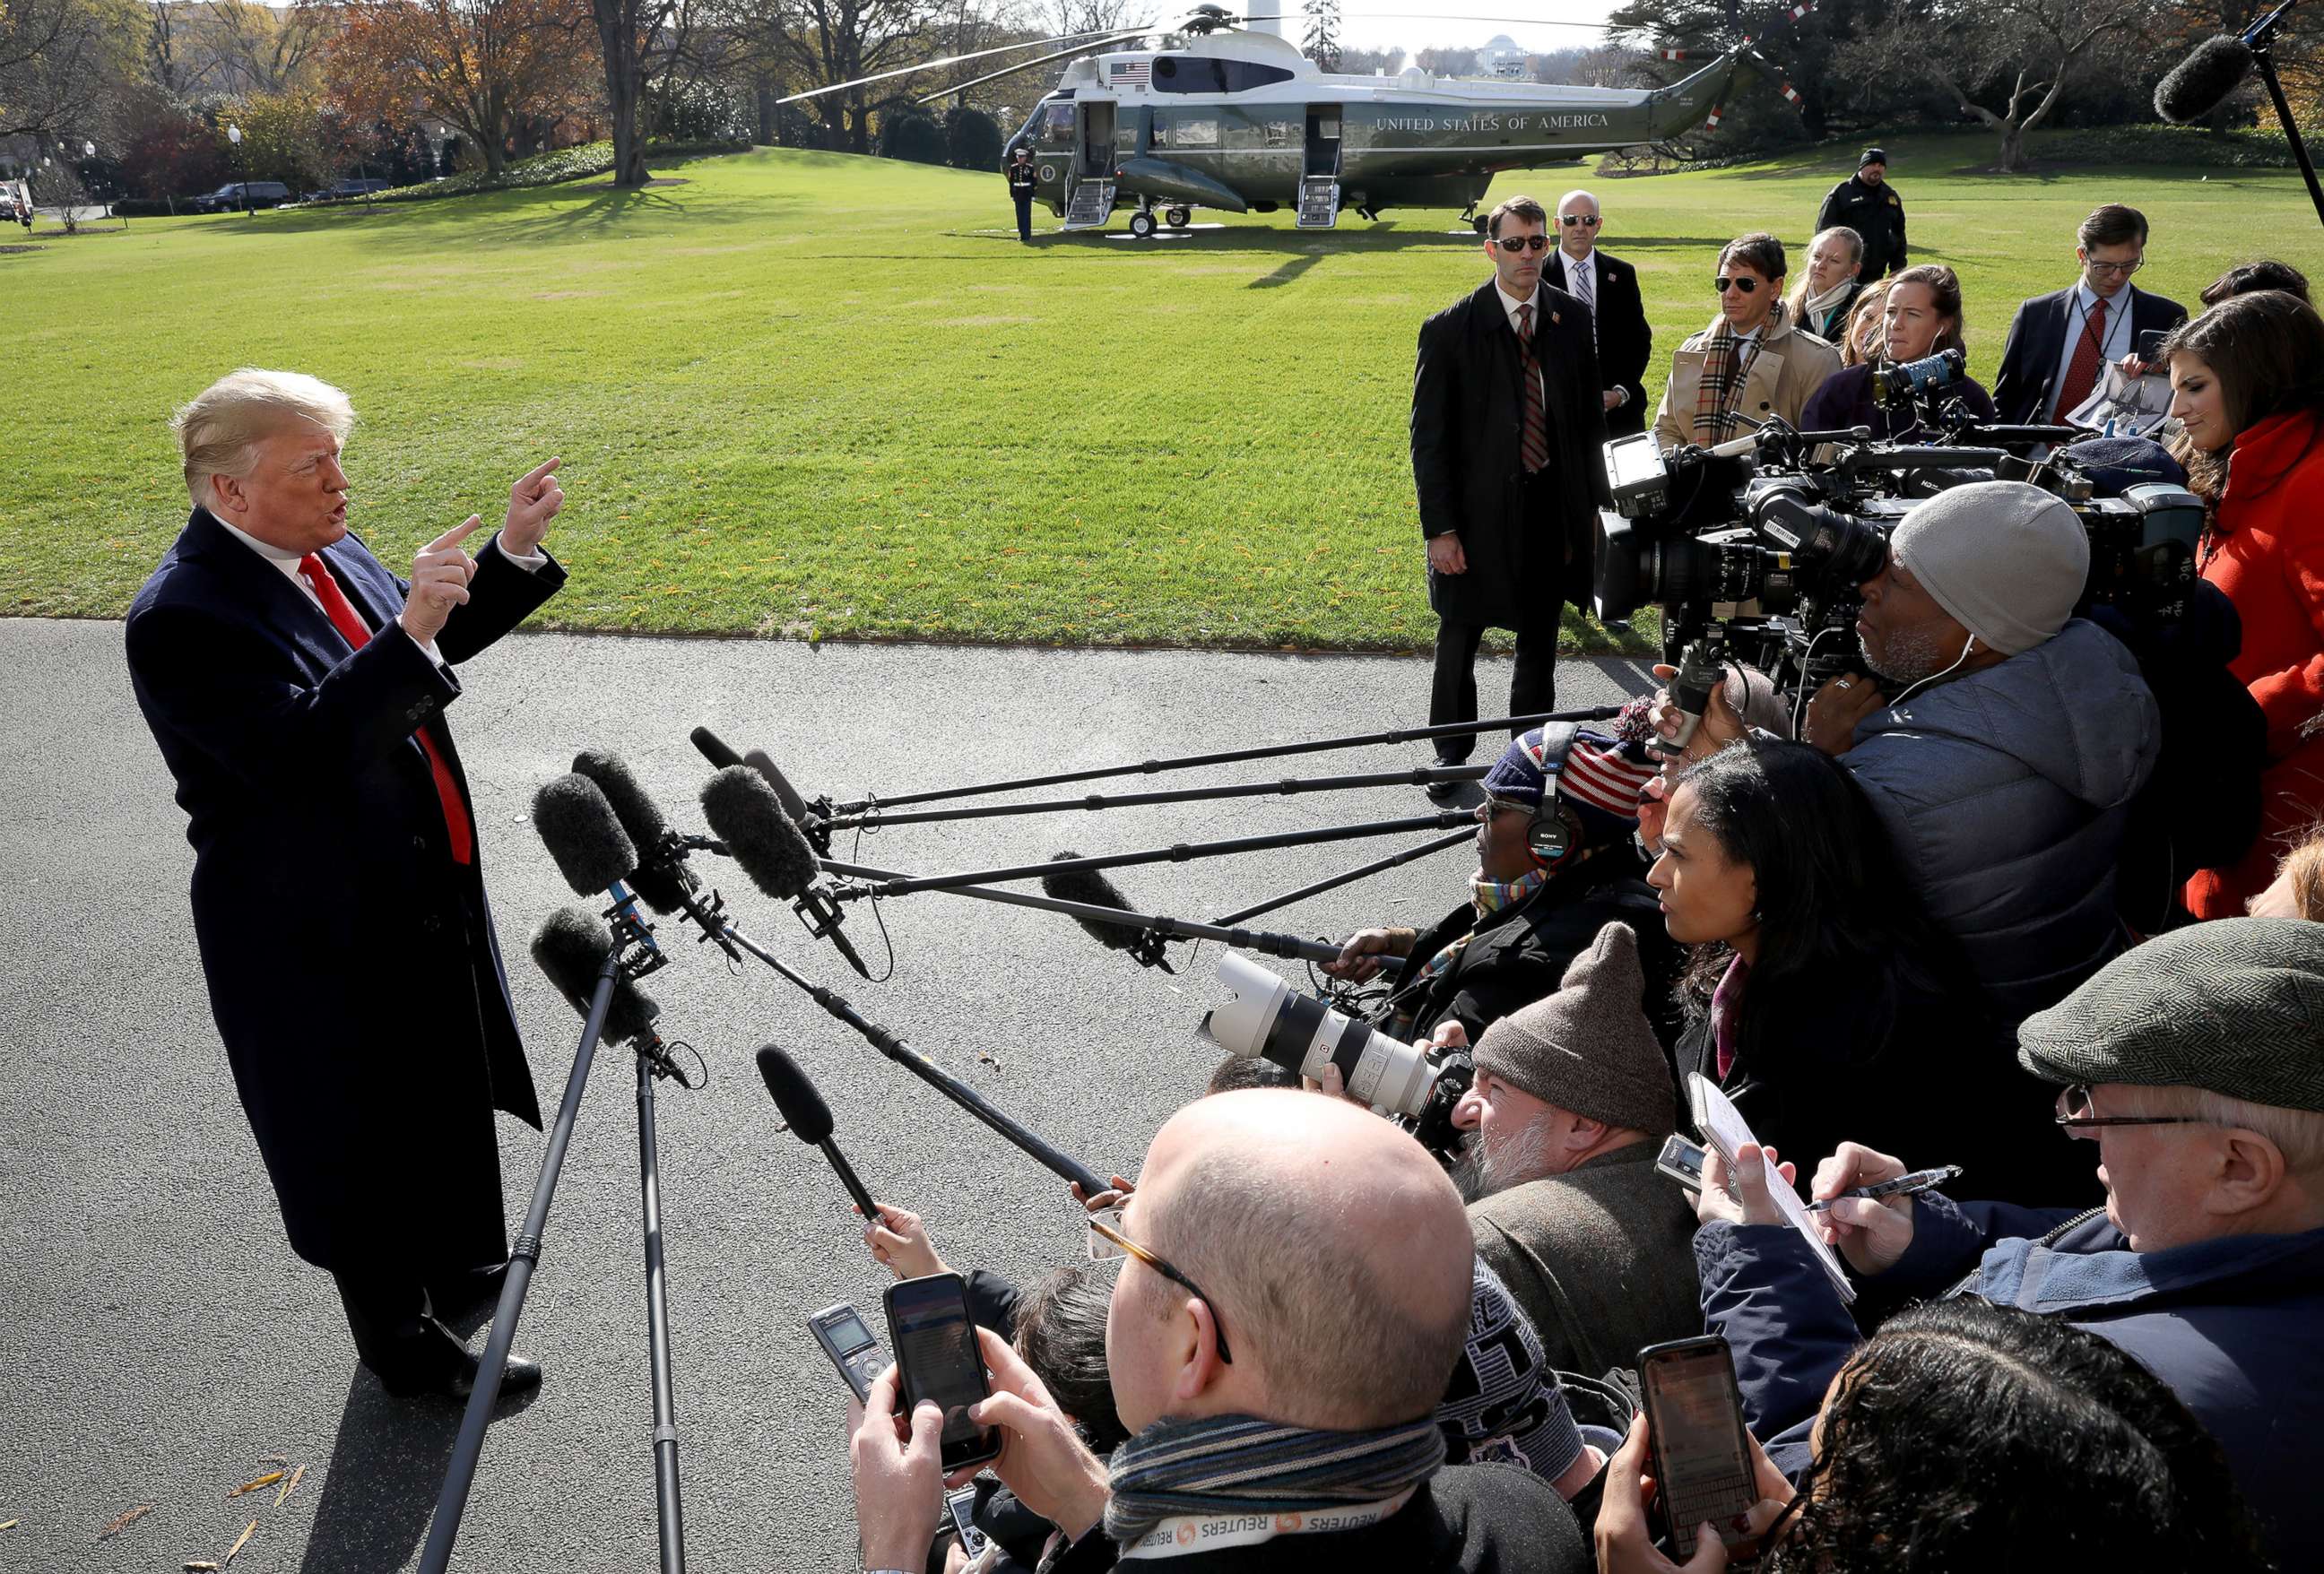 PHOTO: President Donald Trump answers questions from the press while departing the White House, Nov. 29, 2018 in Washington.